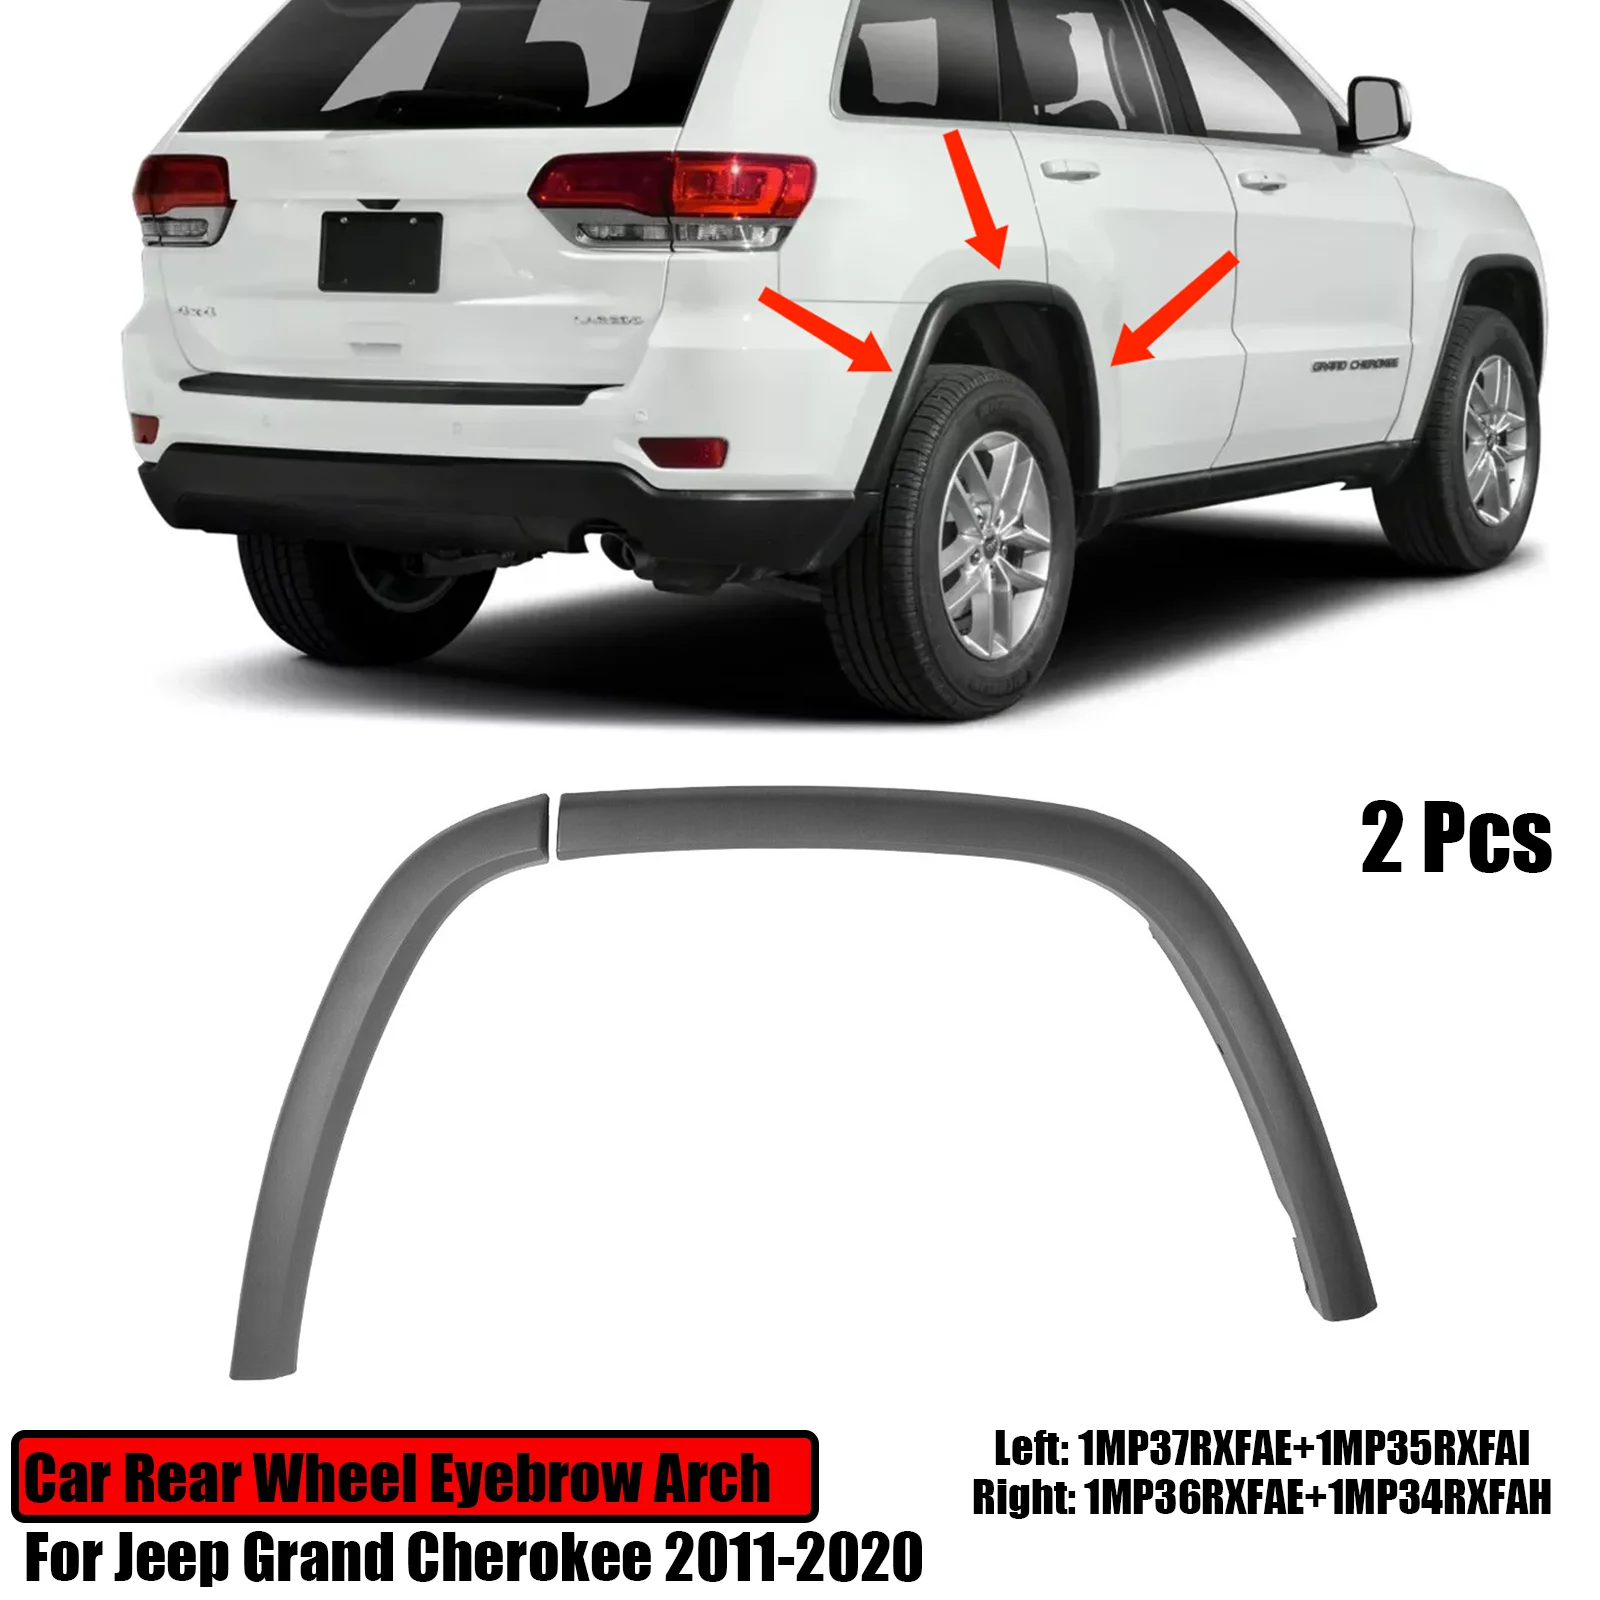 

For Jeep Grand Cherokee 2011-2020 Car Rear Wheel Eyebrow Arch Left/Right Trim Molding Fender Flares Protector Replacement 2PCS